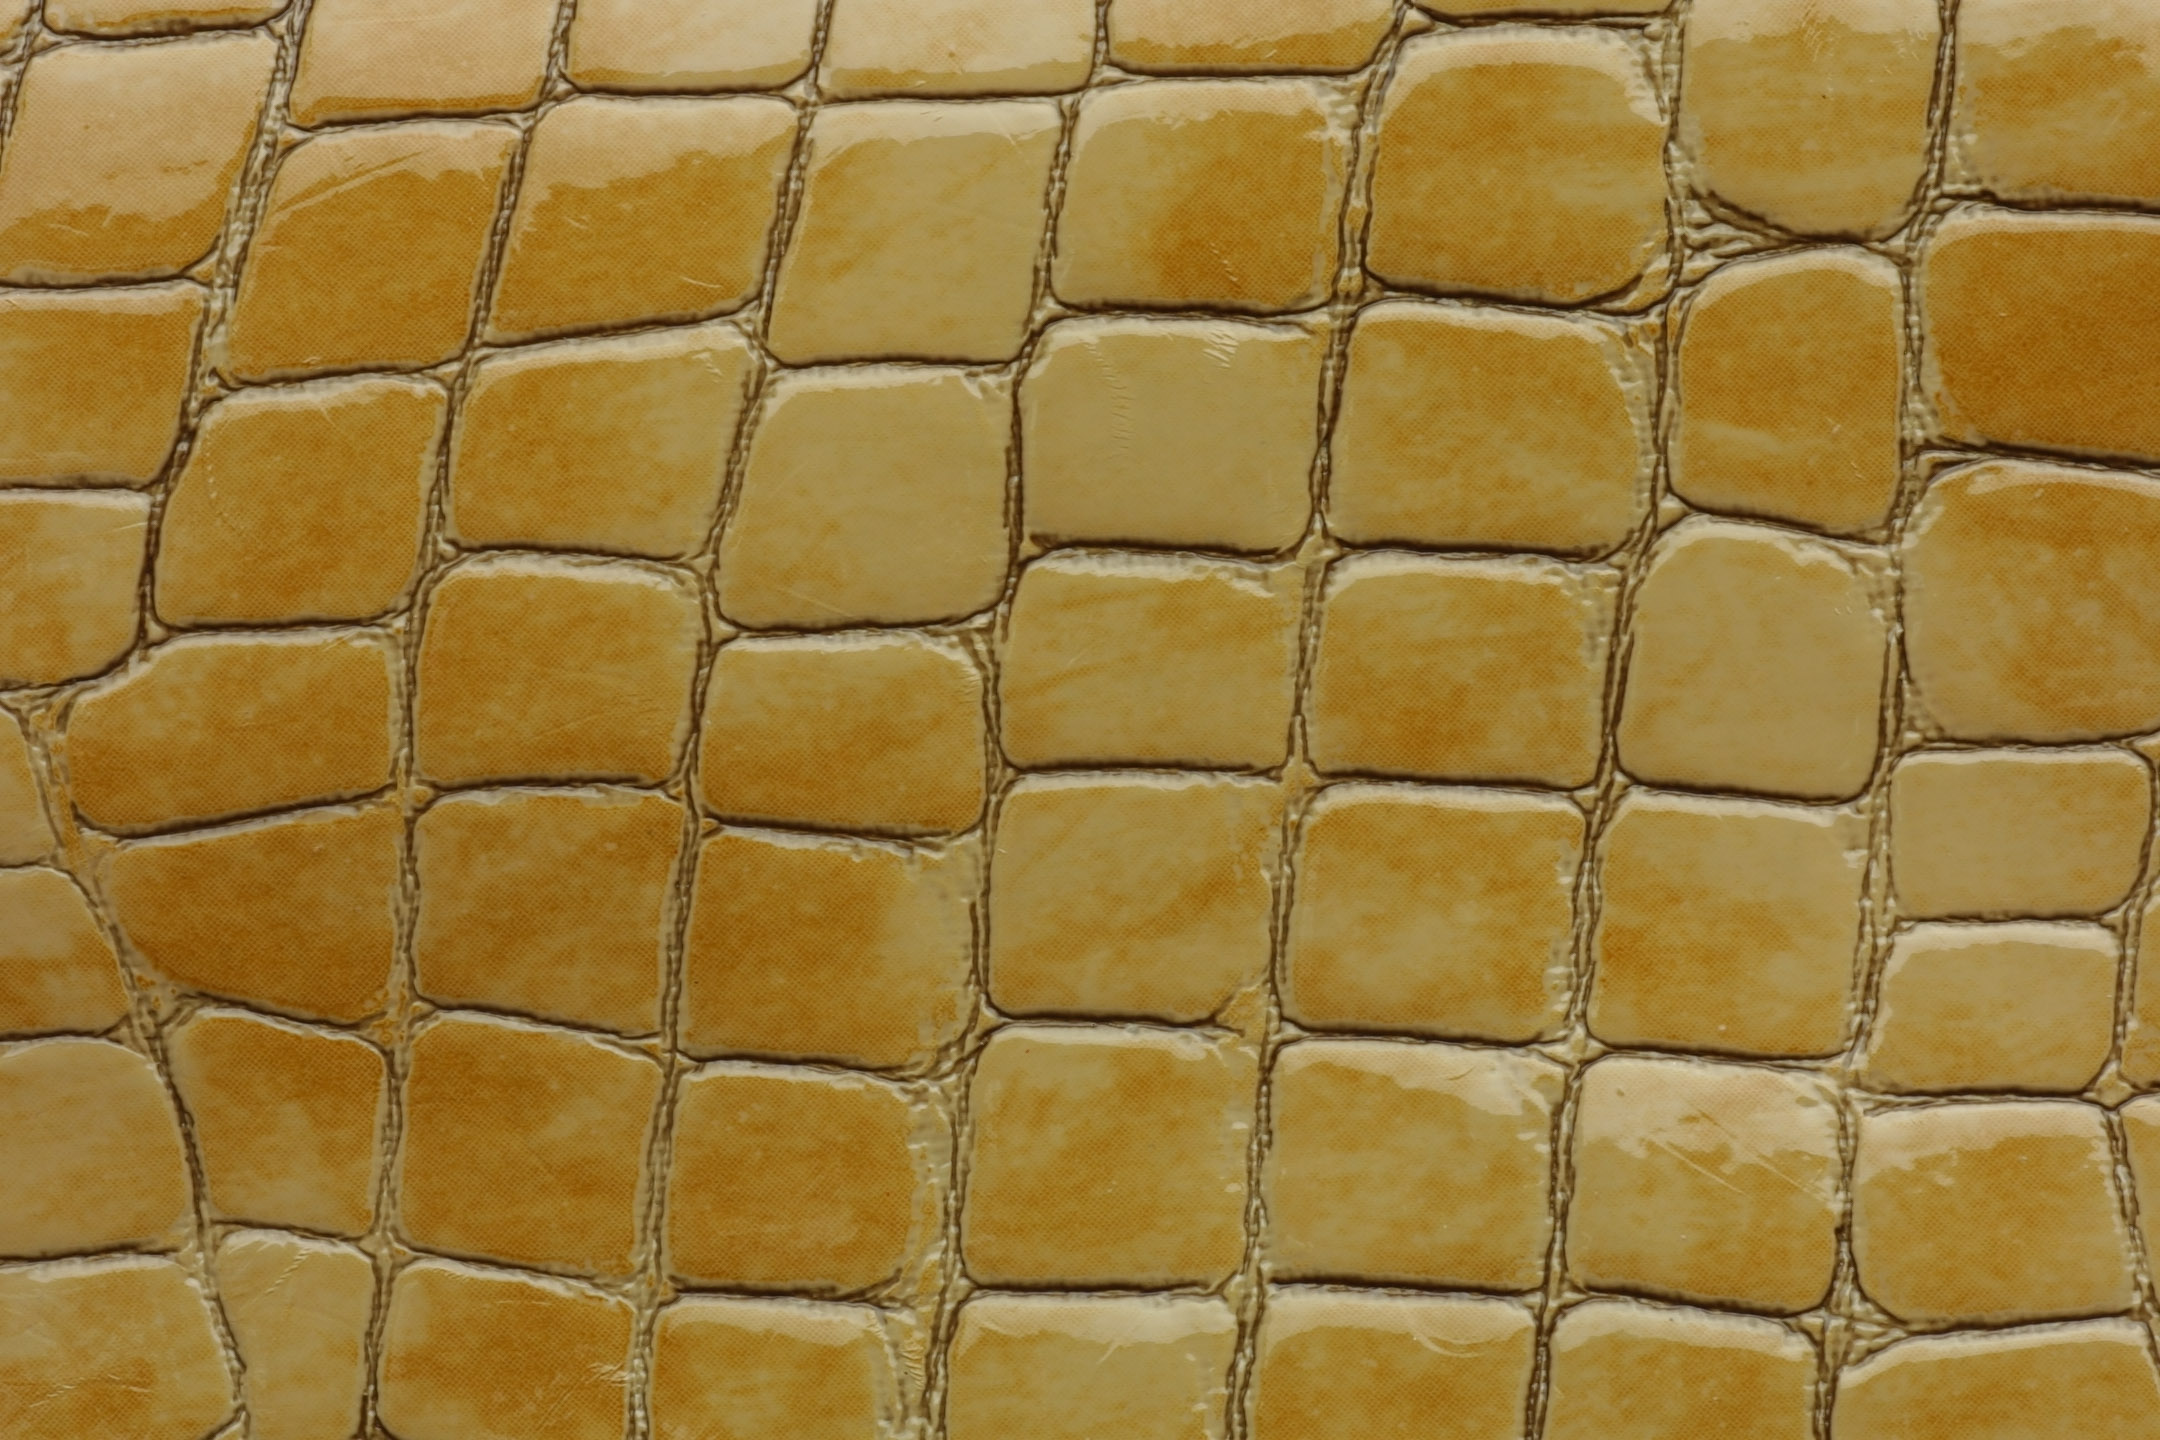 snake leather texture, background, leather background, leather background